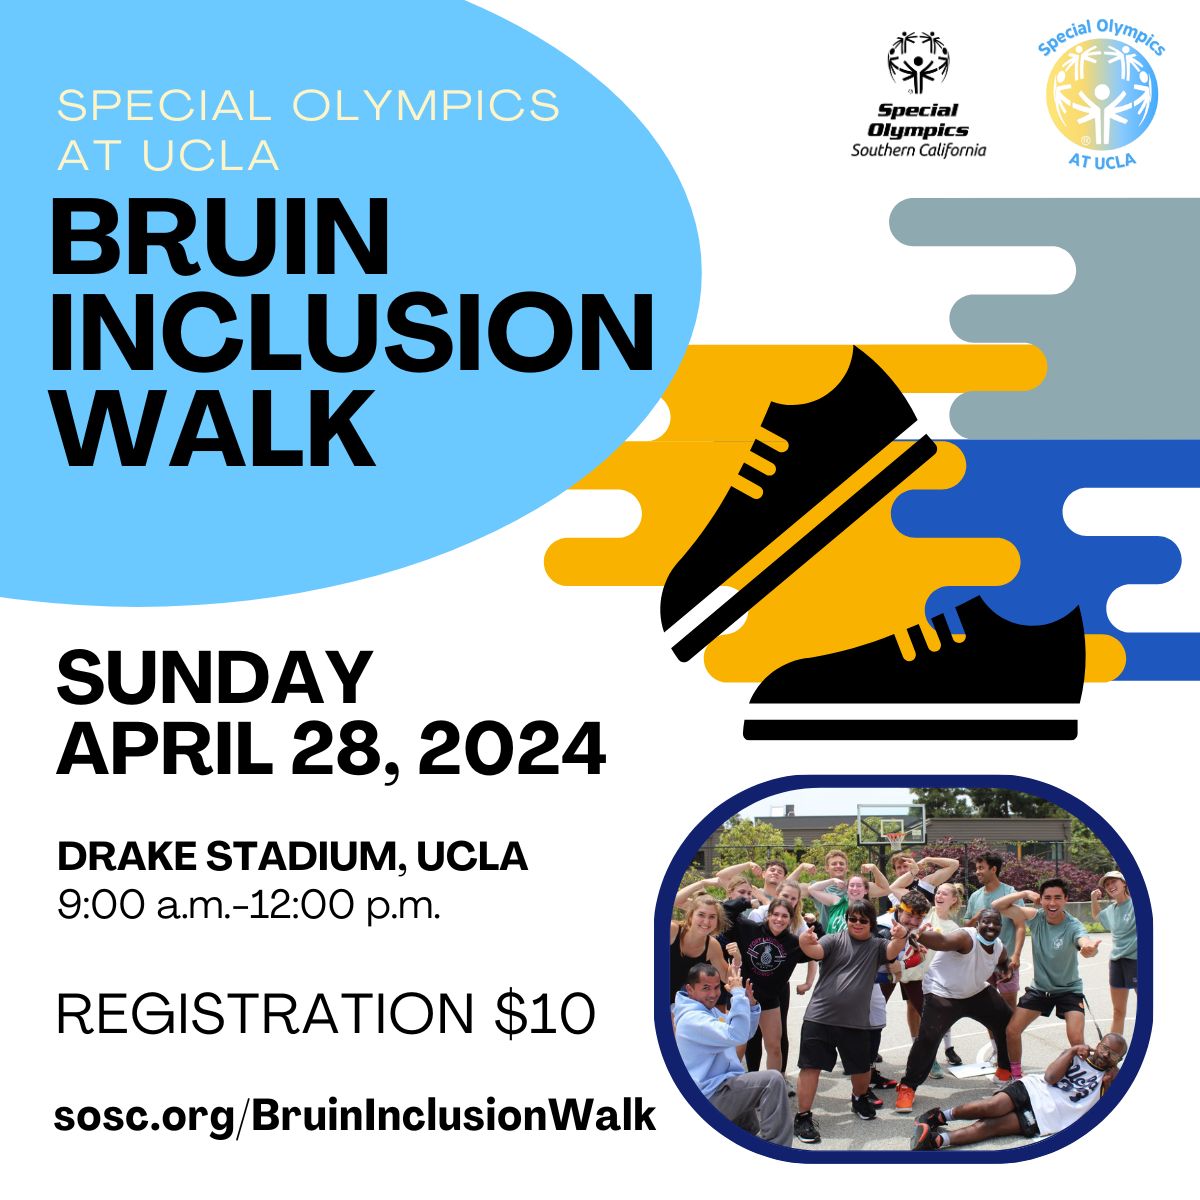 ⏰ There is still time to step into unity with us on 4/28/24, at UCLA's Drake Stadium for the Bruin Inclusion Walk! Sign up or donate now at sosc.org/bruininclusion…. Join us in making a difference & help create an inclusive world.👍 #BruinInclusionWalk #WeAreSOSC